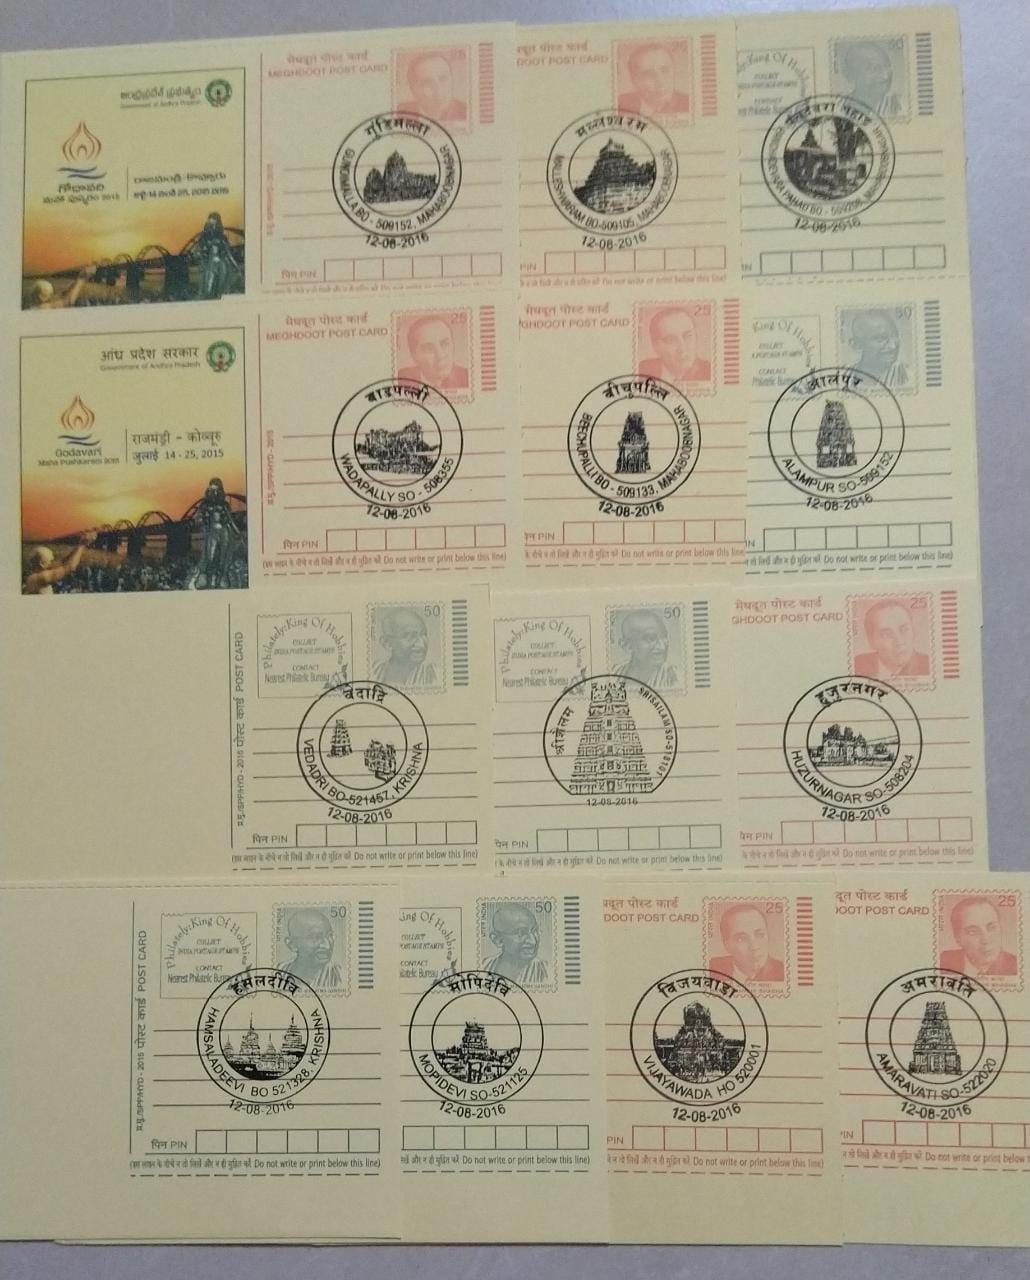 A very nice and beautiful collection of 13 pictorial cancellations of Hindu religious places of South India.